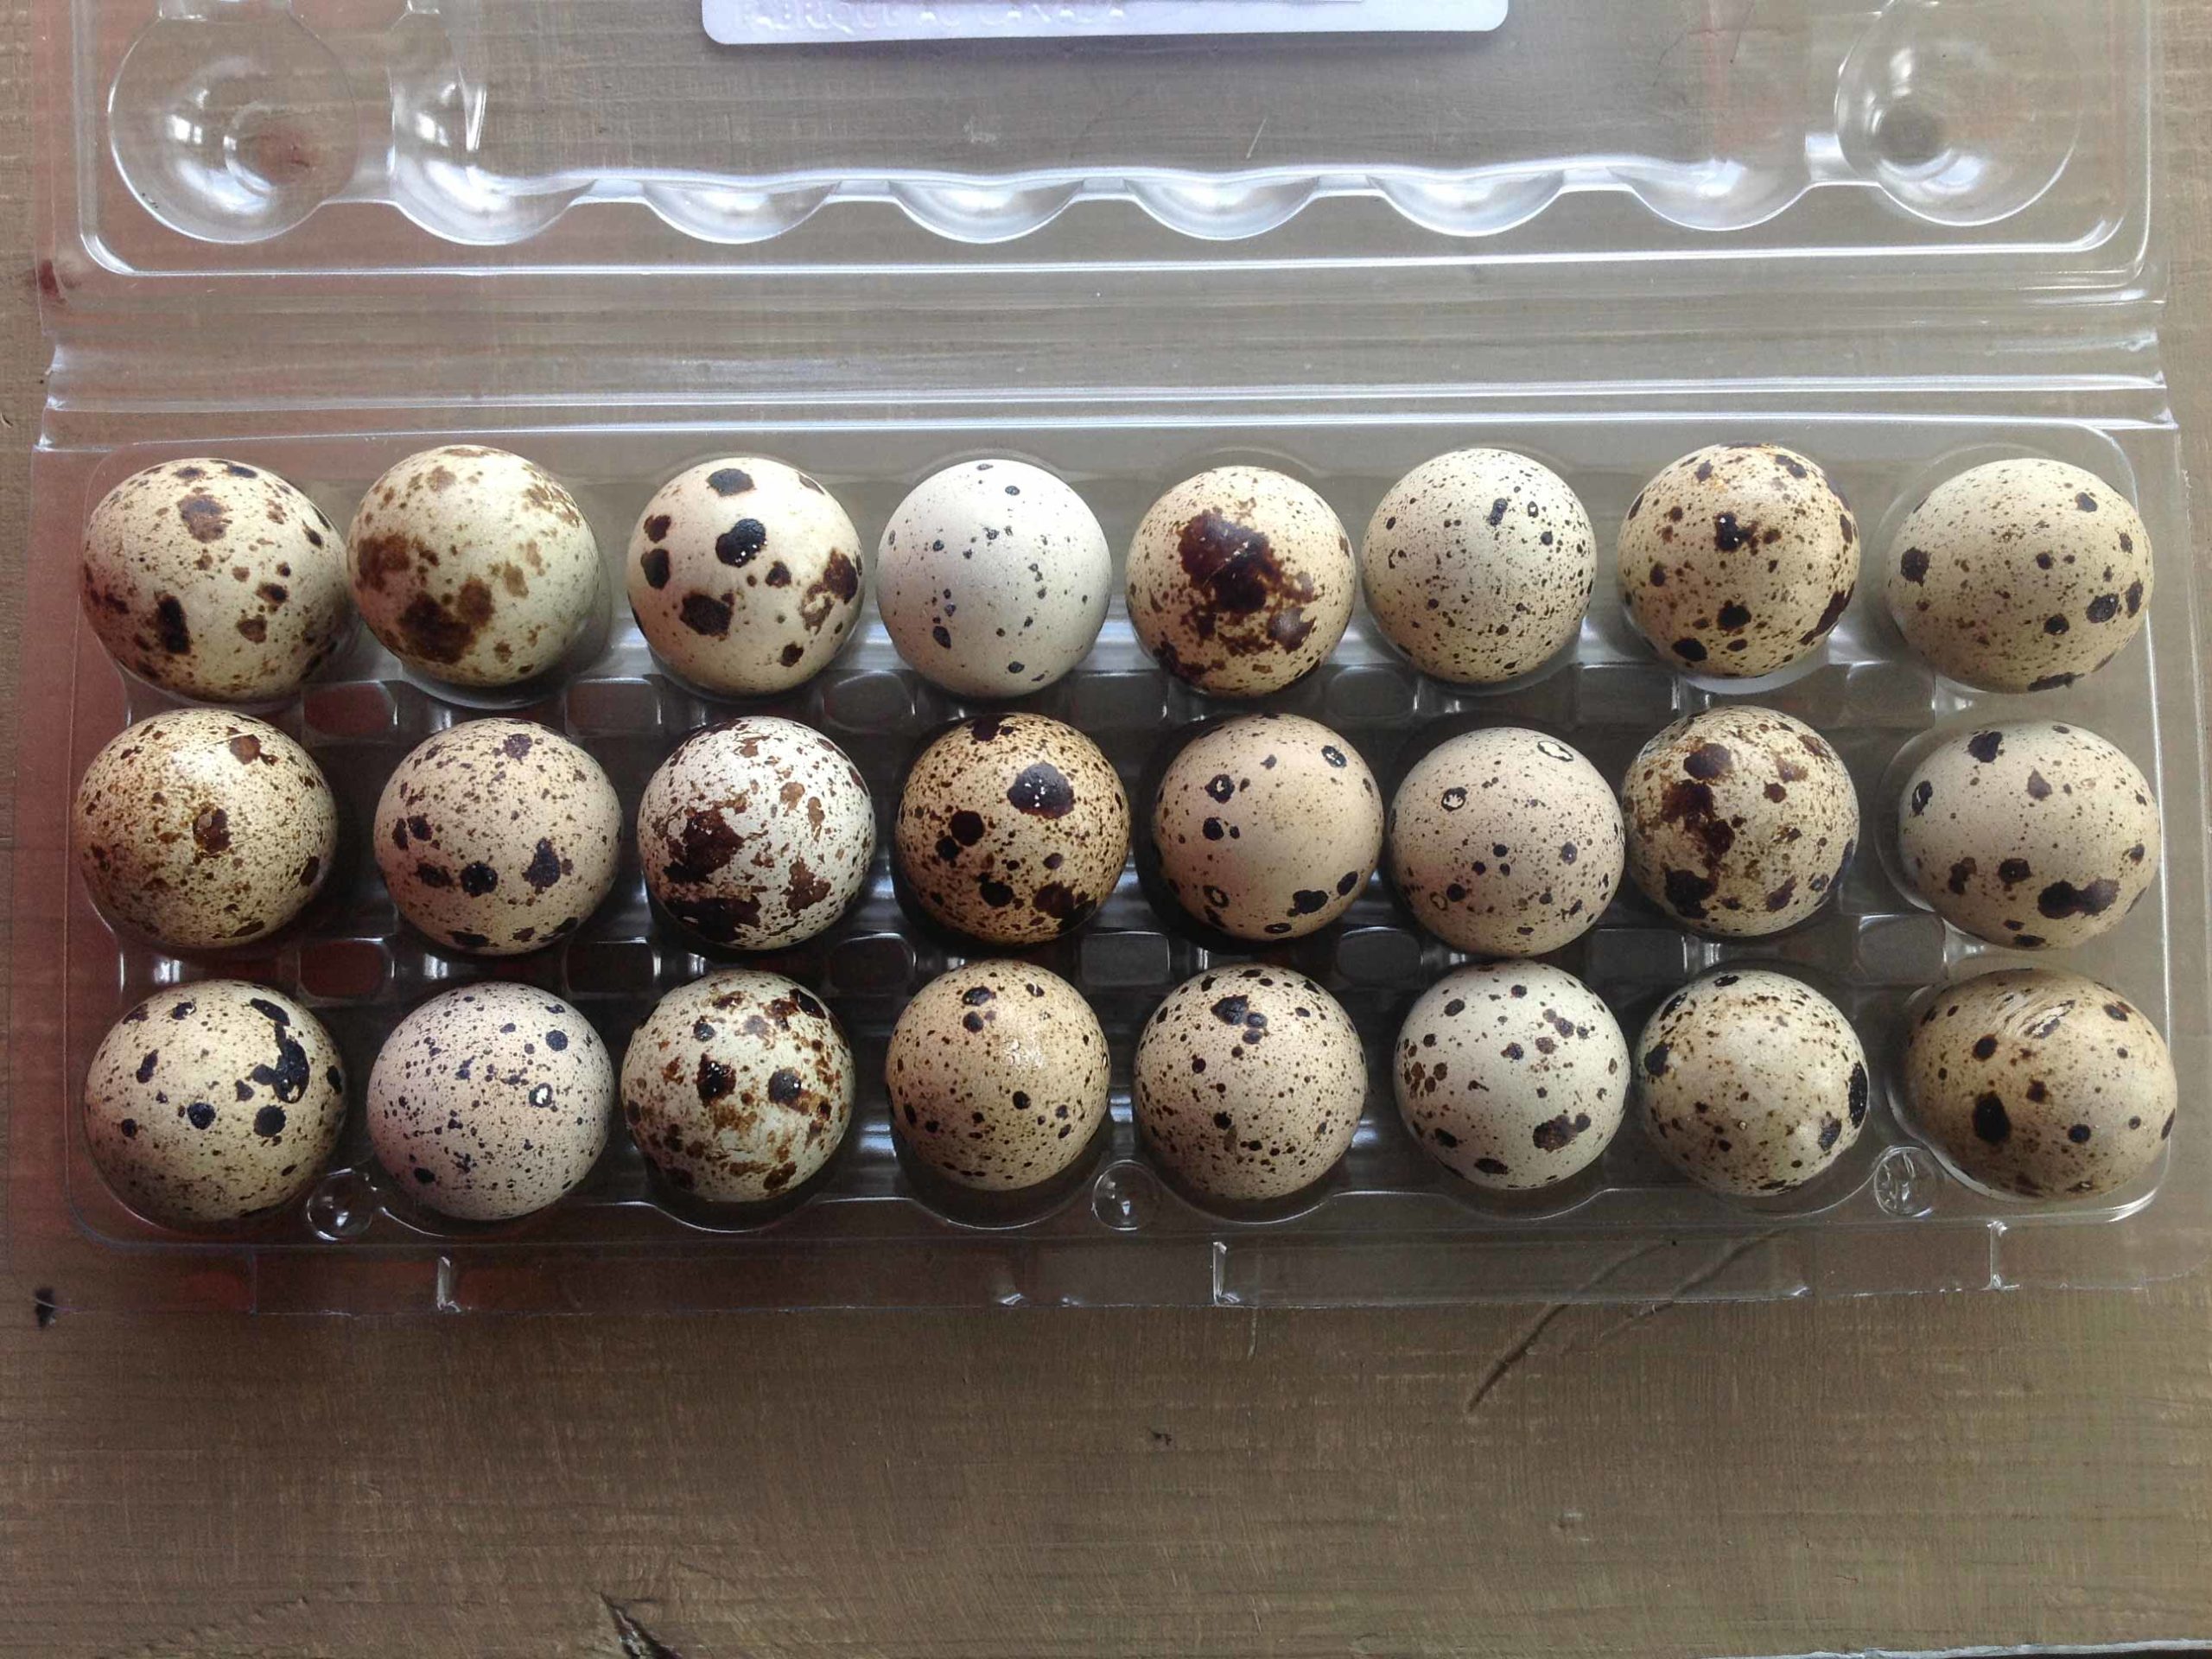 Small speckled eggs in clear carton; 3 rows of 8 eggs